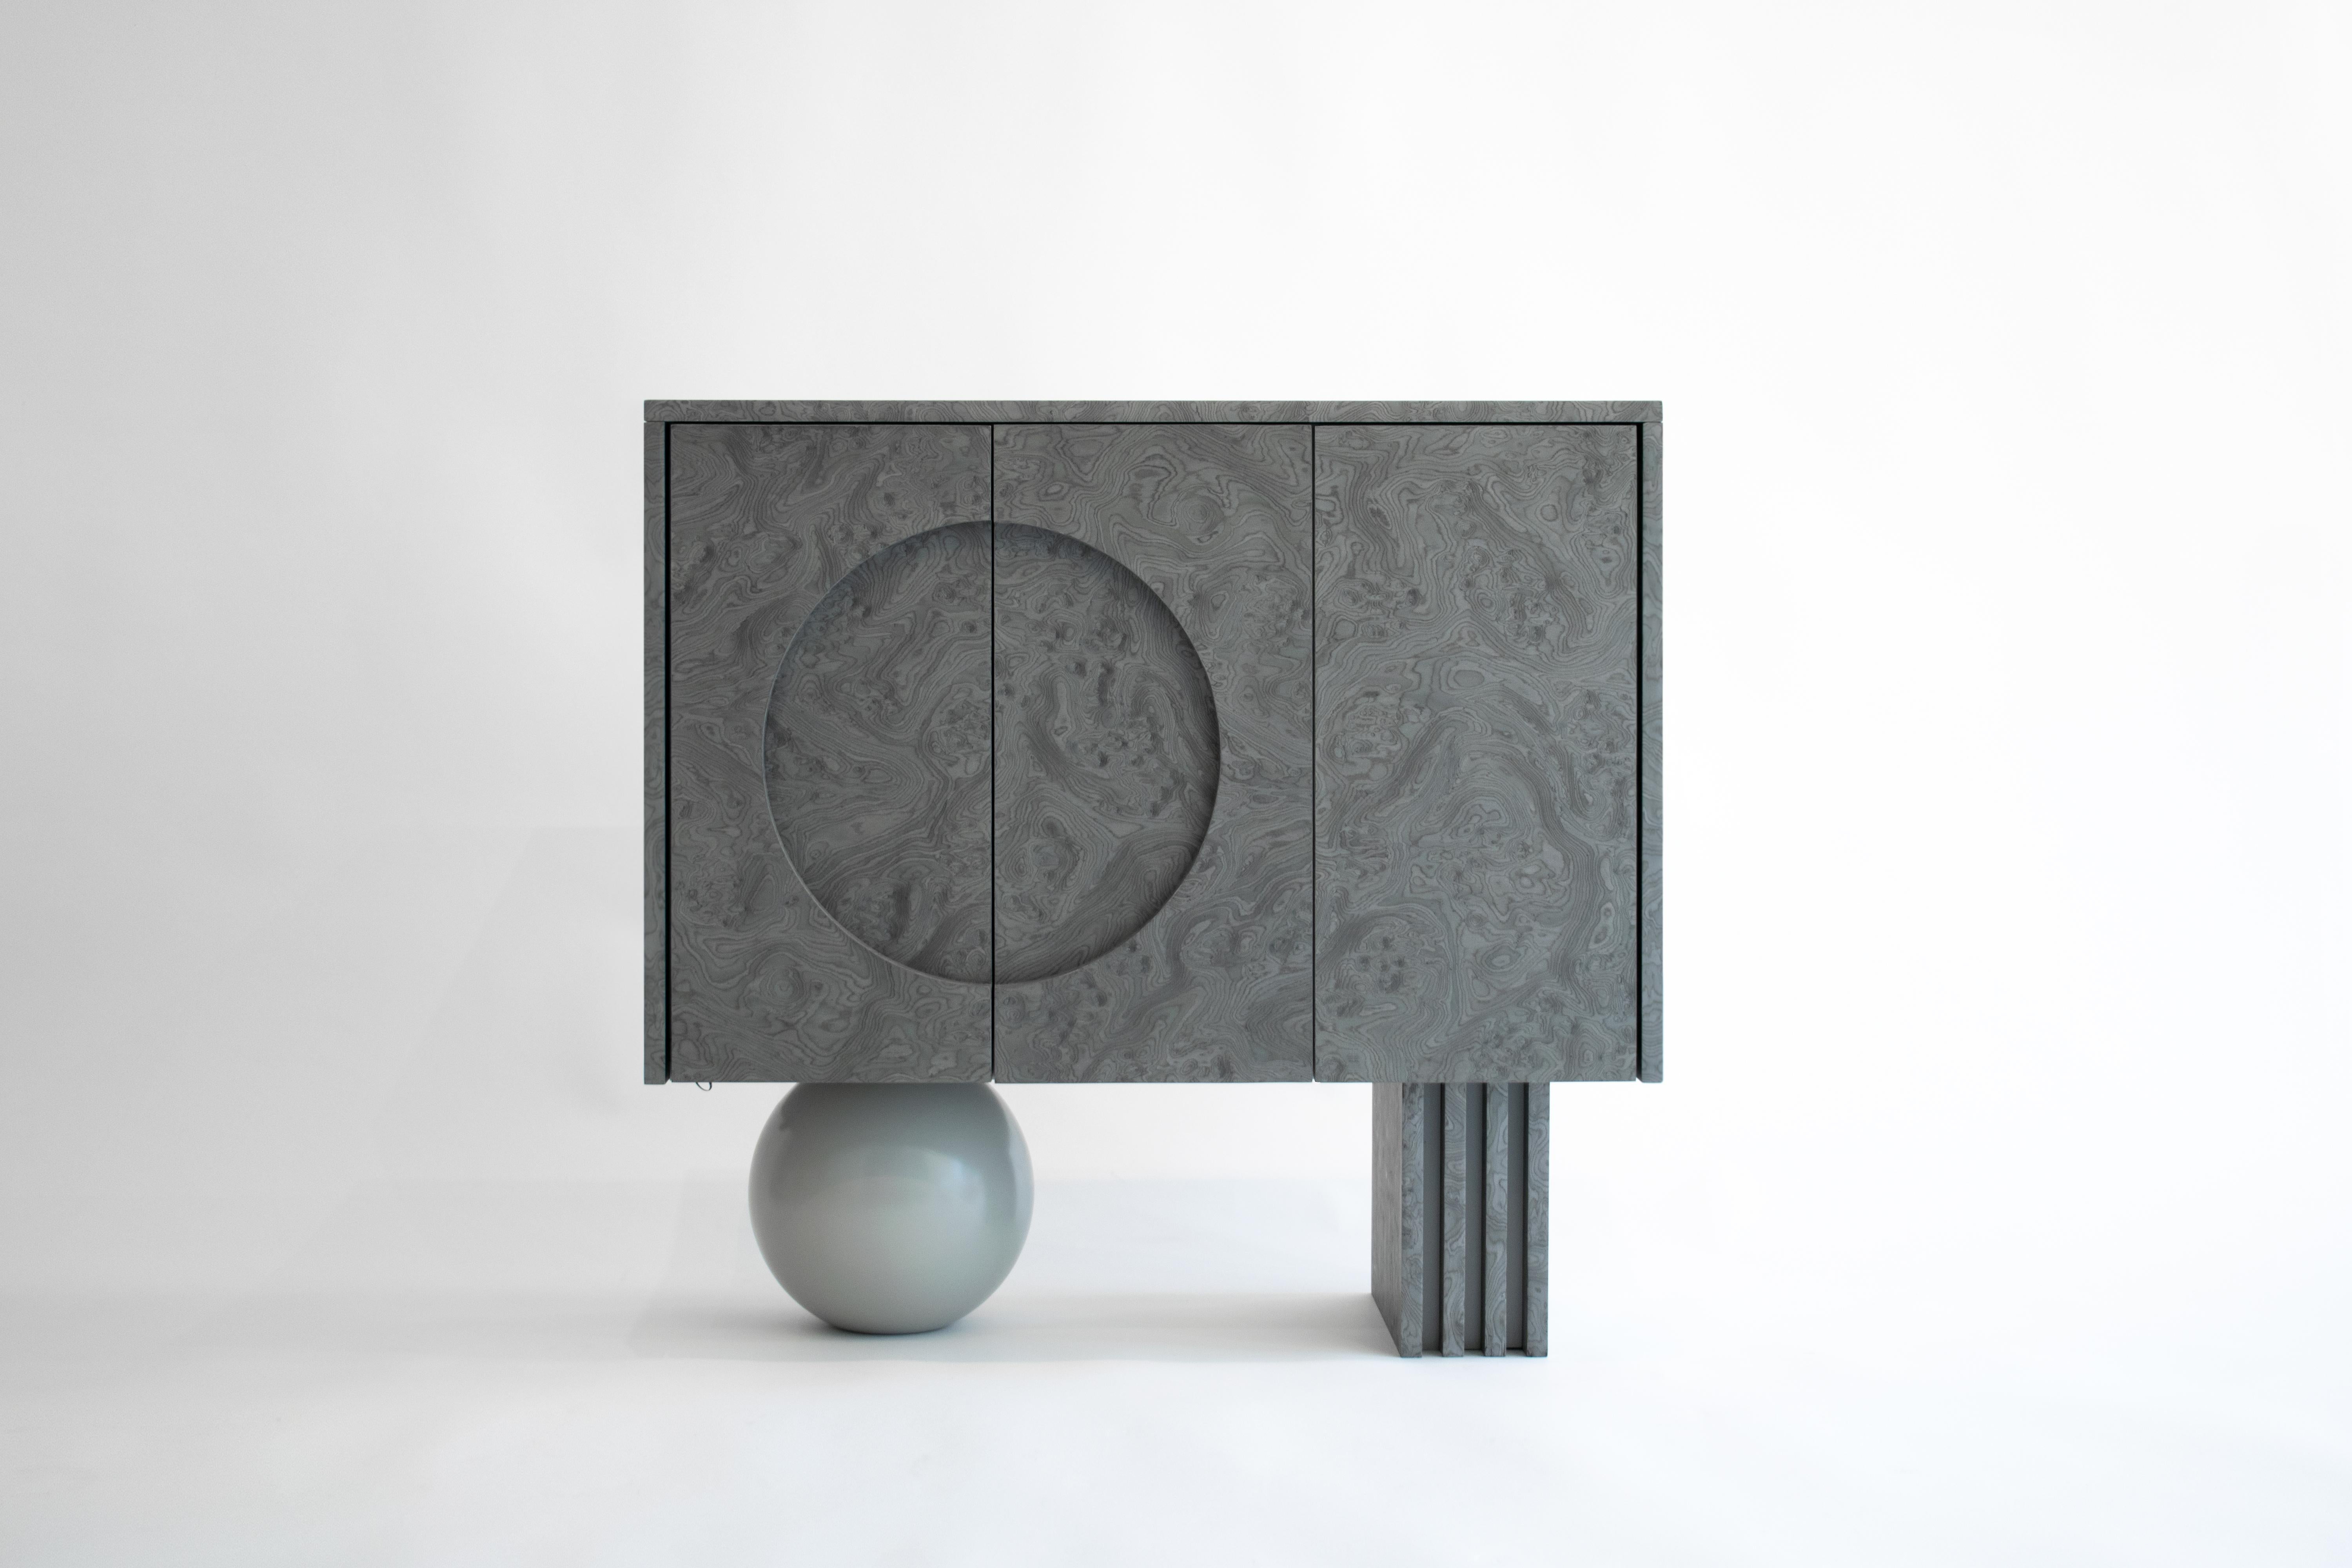 Following the dark tone pieces in the series, this piece takes the shape of a concentrated prism, gently levitating over the base plane. The triple door buffet is covered in ALPI silver veneer, with a subtle engraved moon circle in its left side.